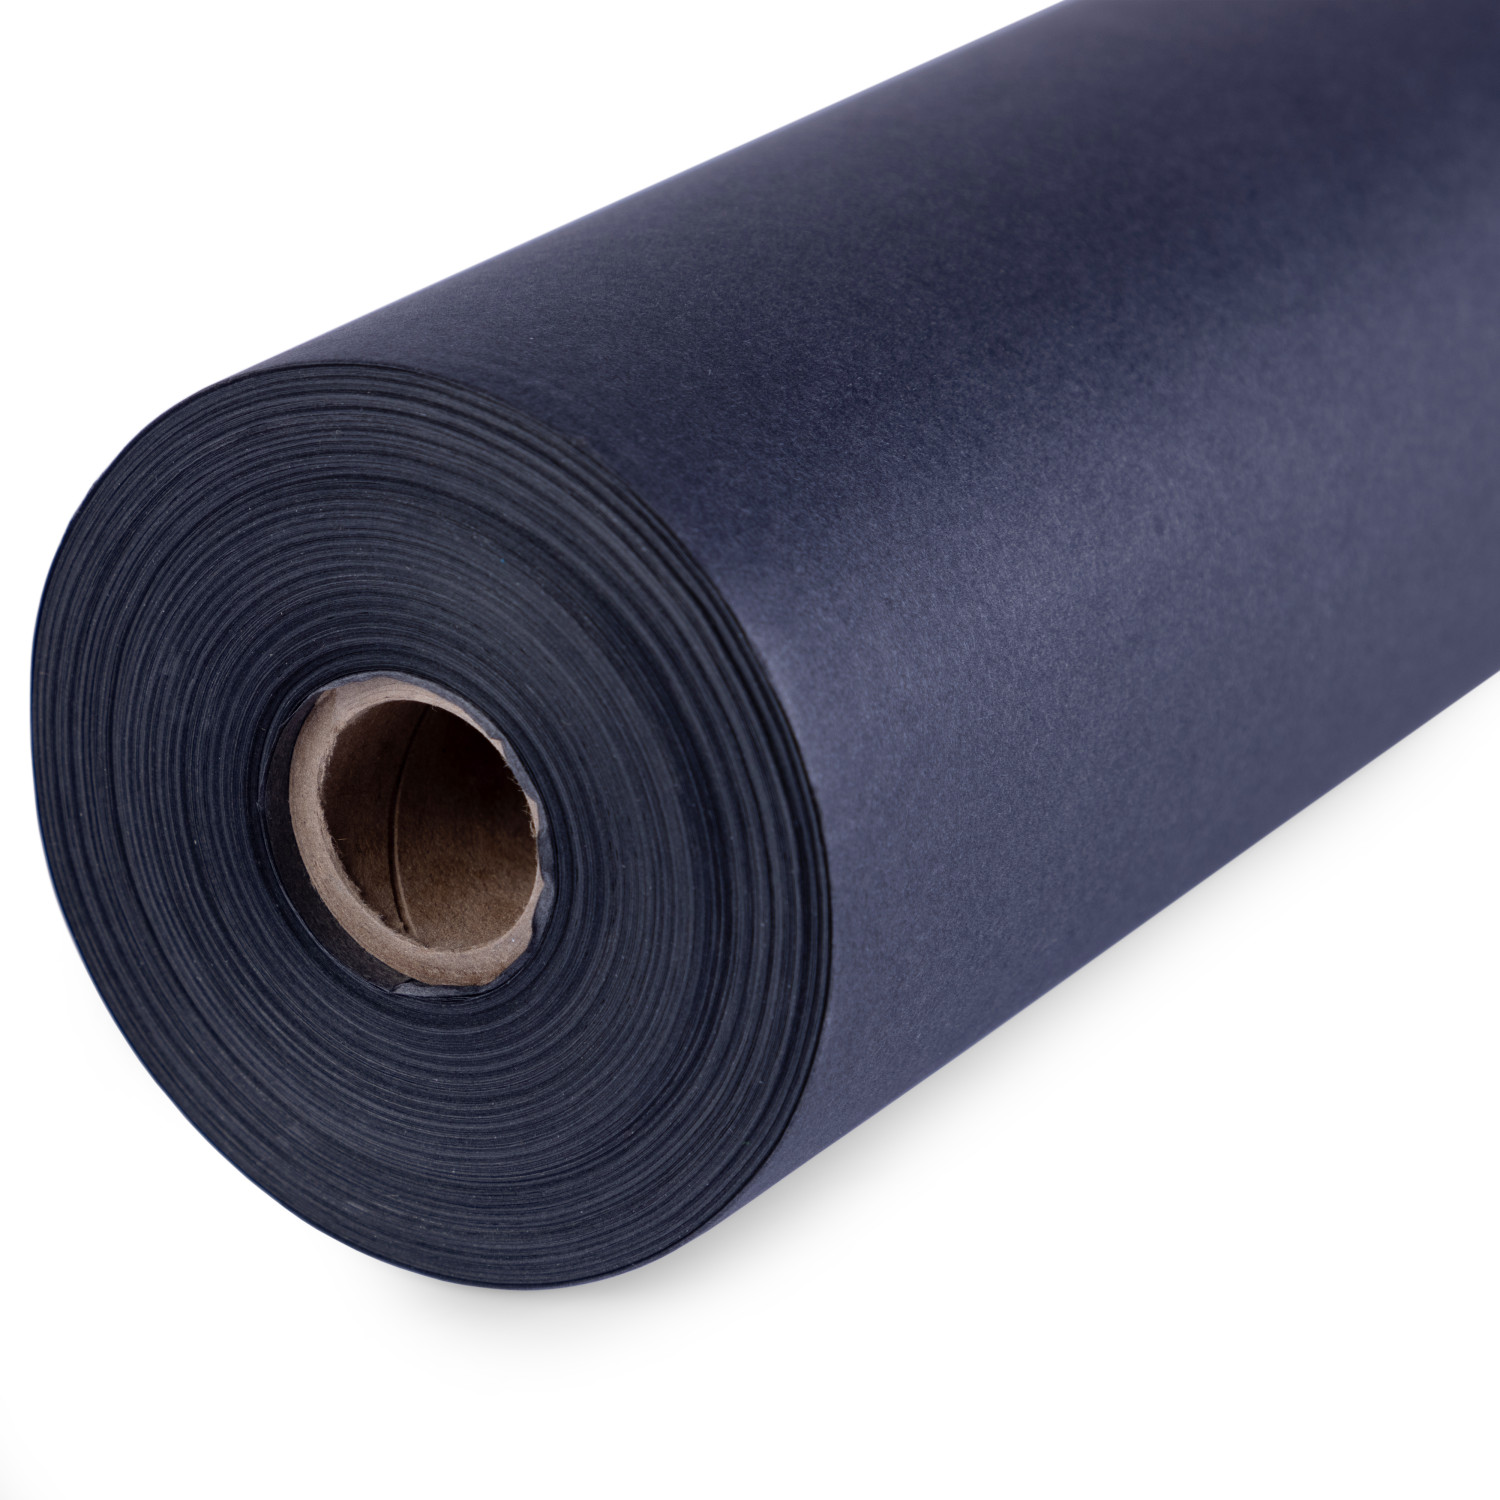 Black Kraft Arts and Crafts Paper Roll - 12 inches by 150 Feet